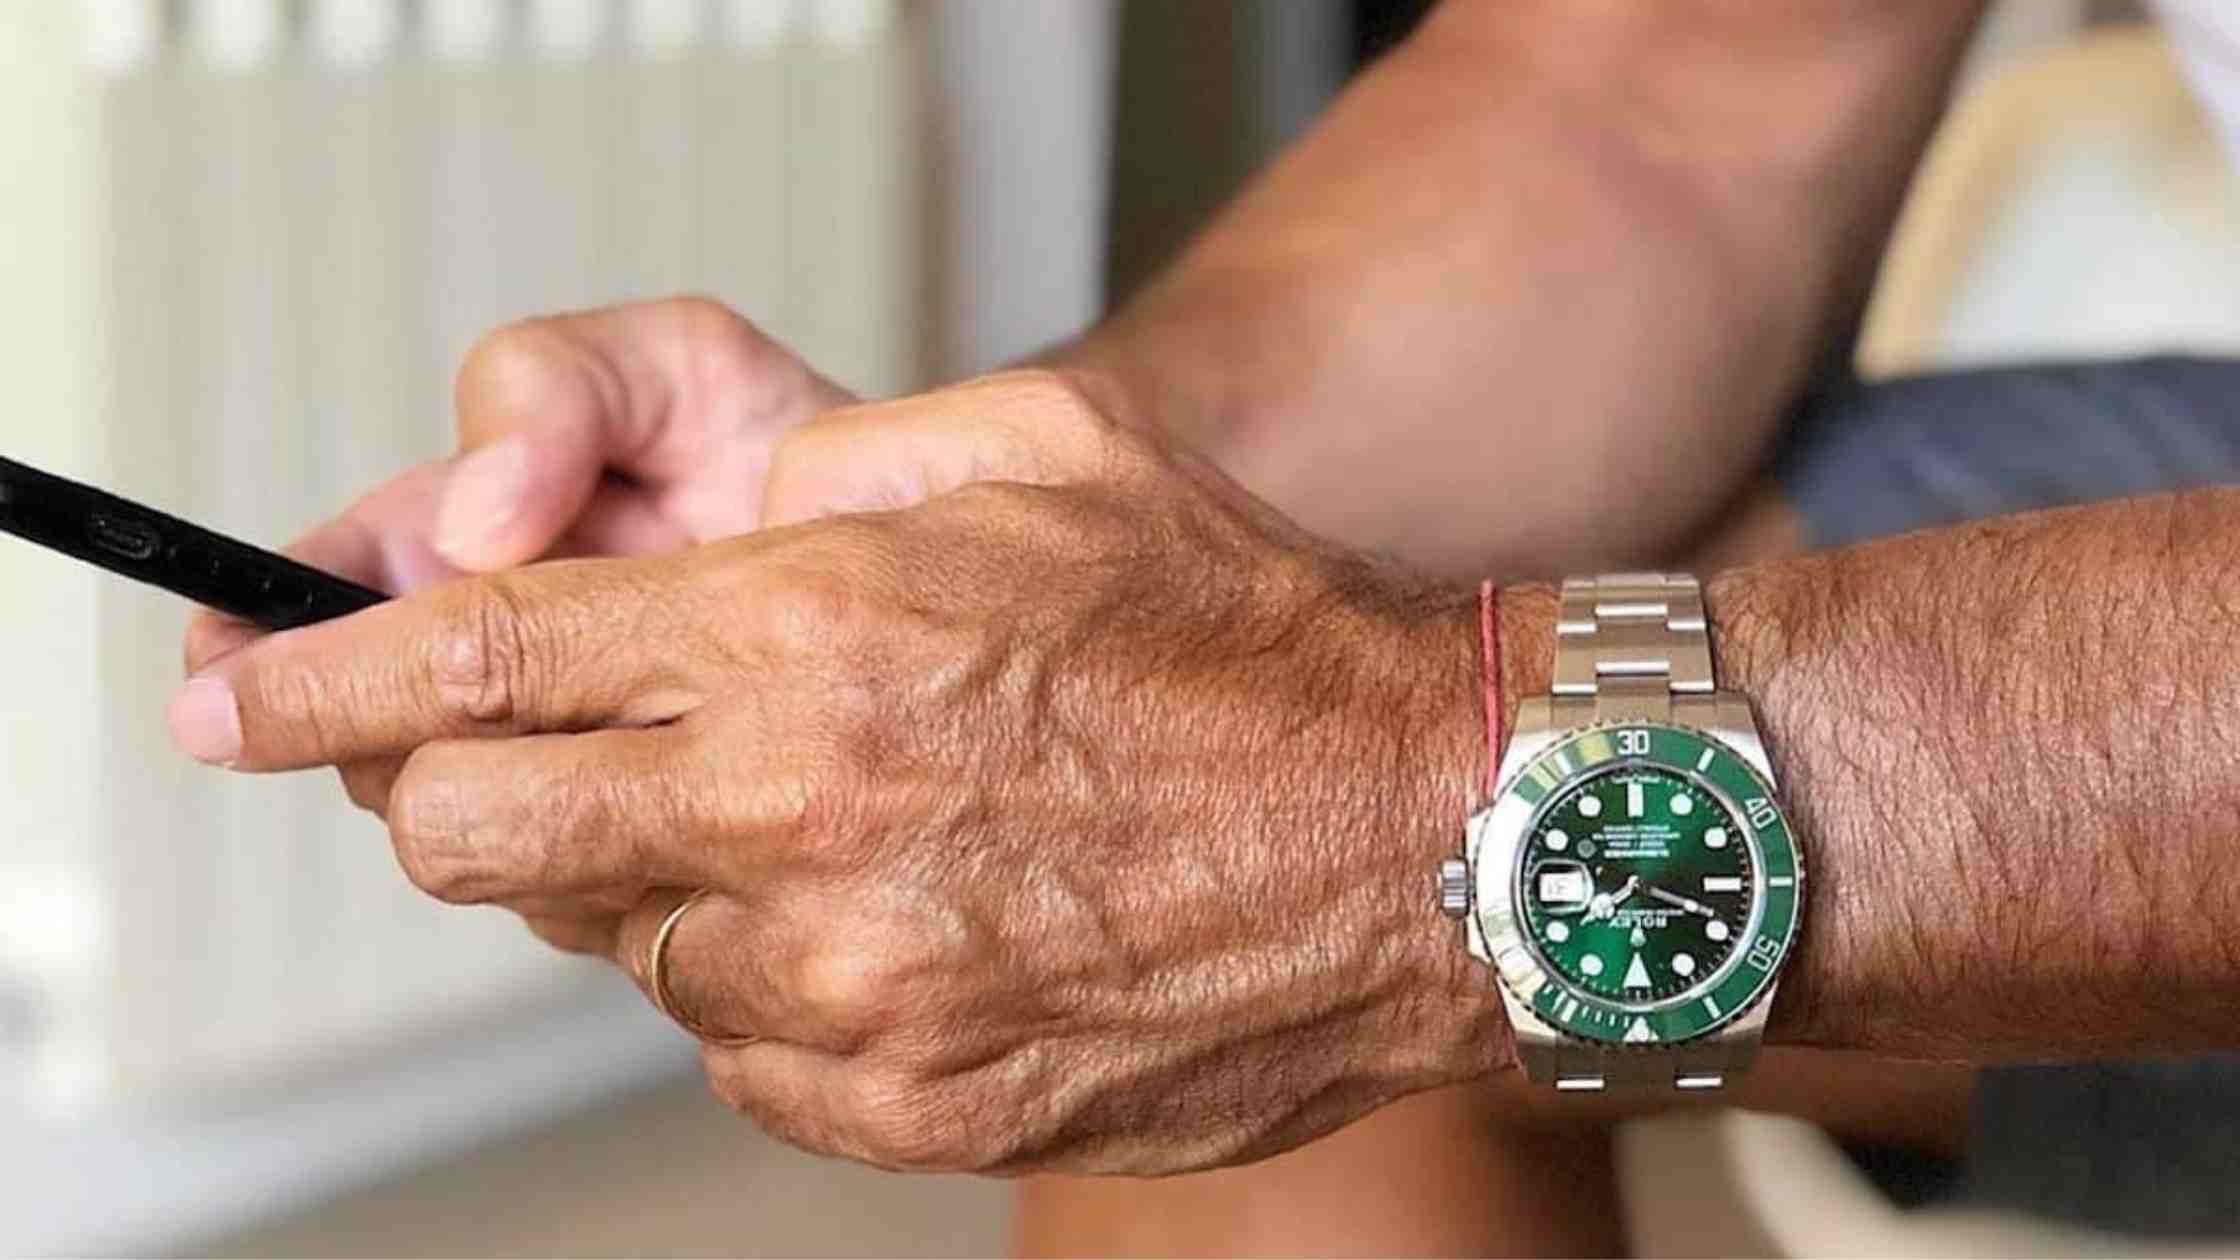 Is the Rolex Hulk discontinued? - Why did they stop making Hulk?